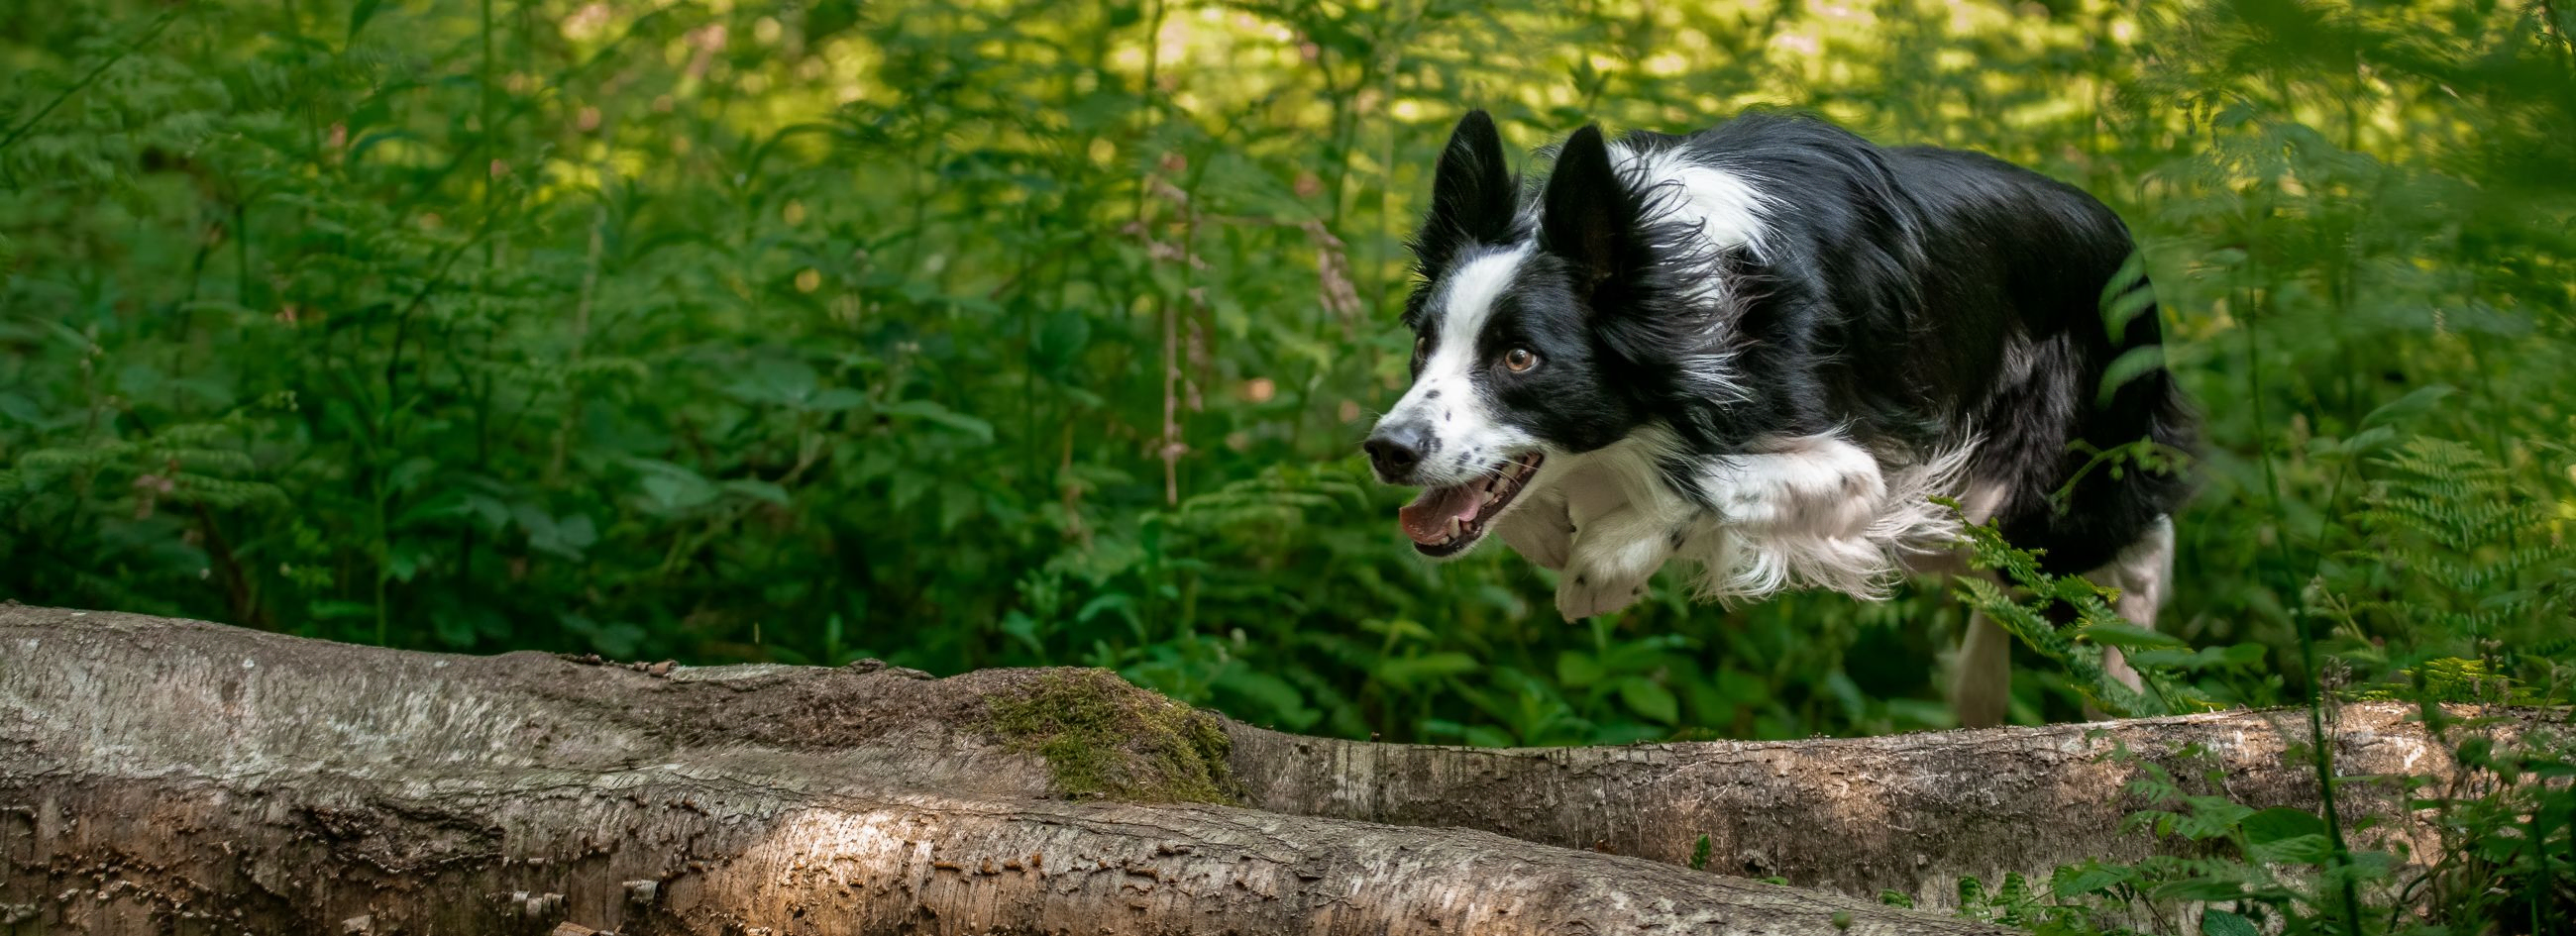 Collie dog jumping over a log